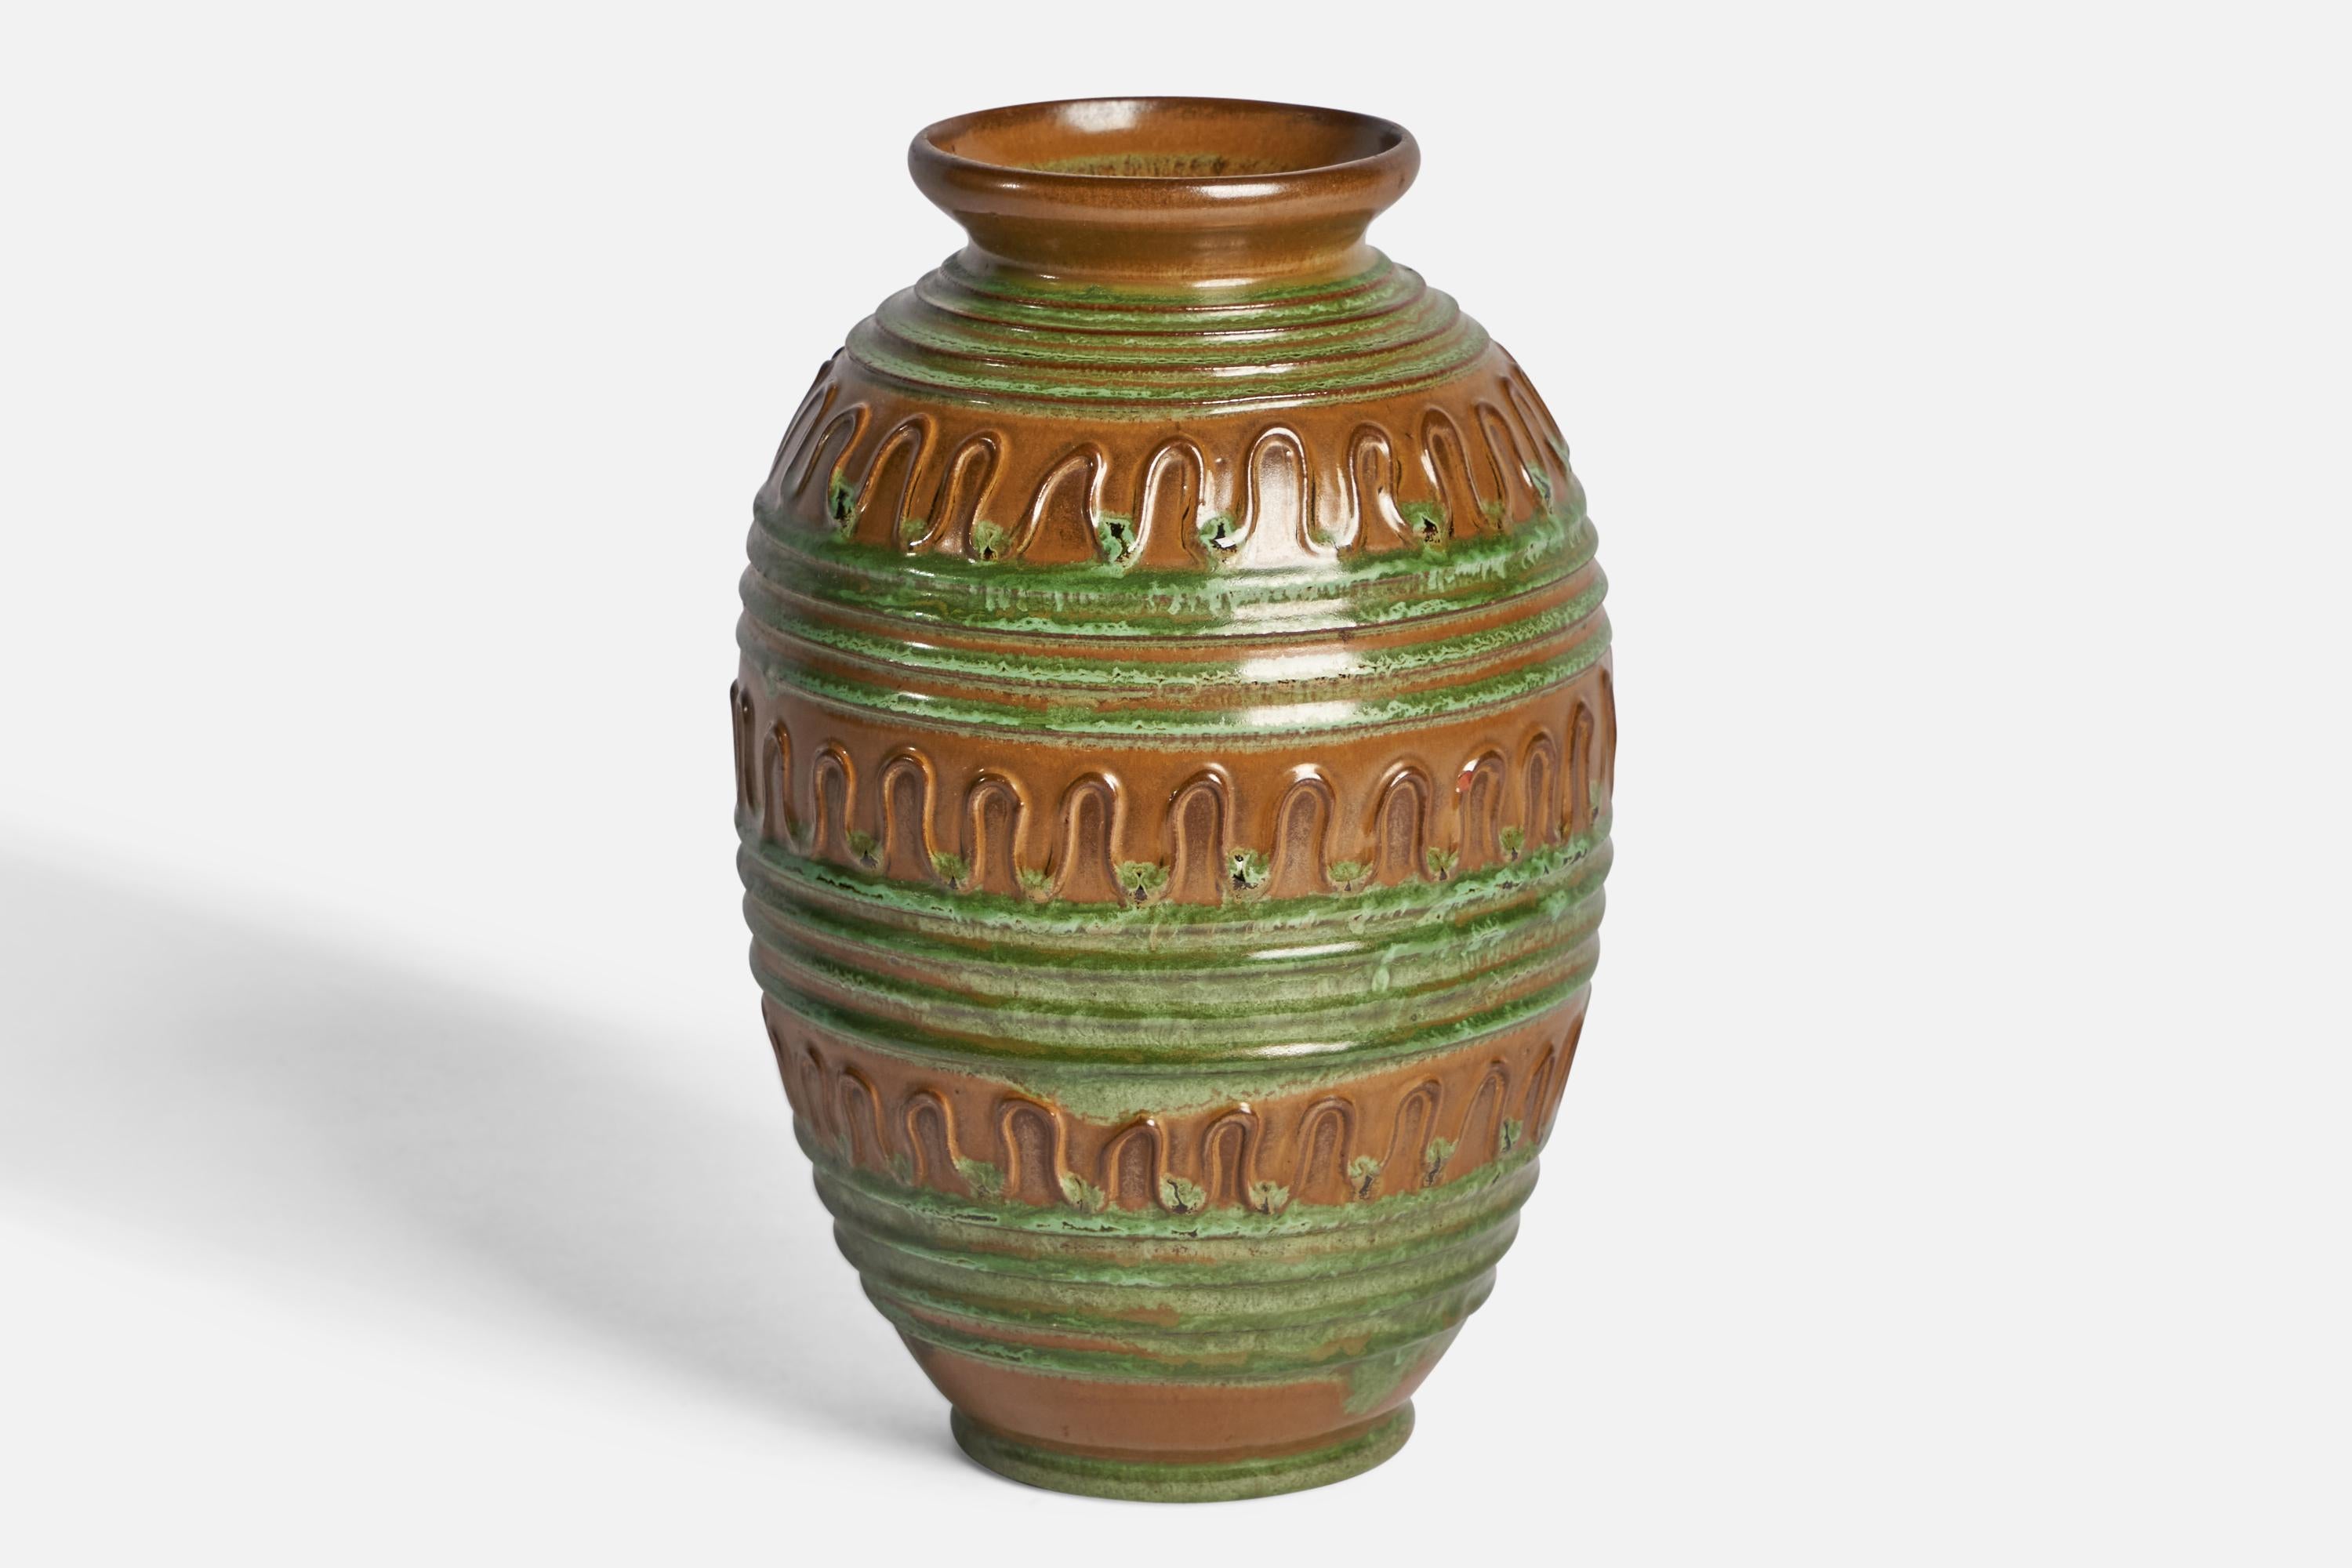 A green and brown-glazed earthenware vase designed by Erik Mornils and produced by Nittsjö, Sweden, 1930s.